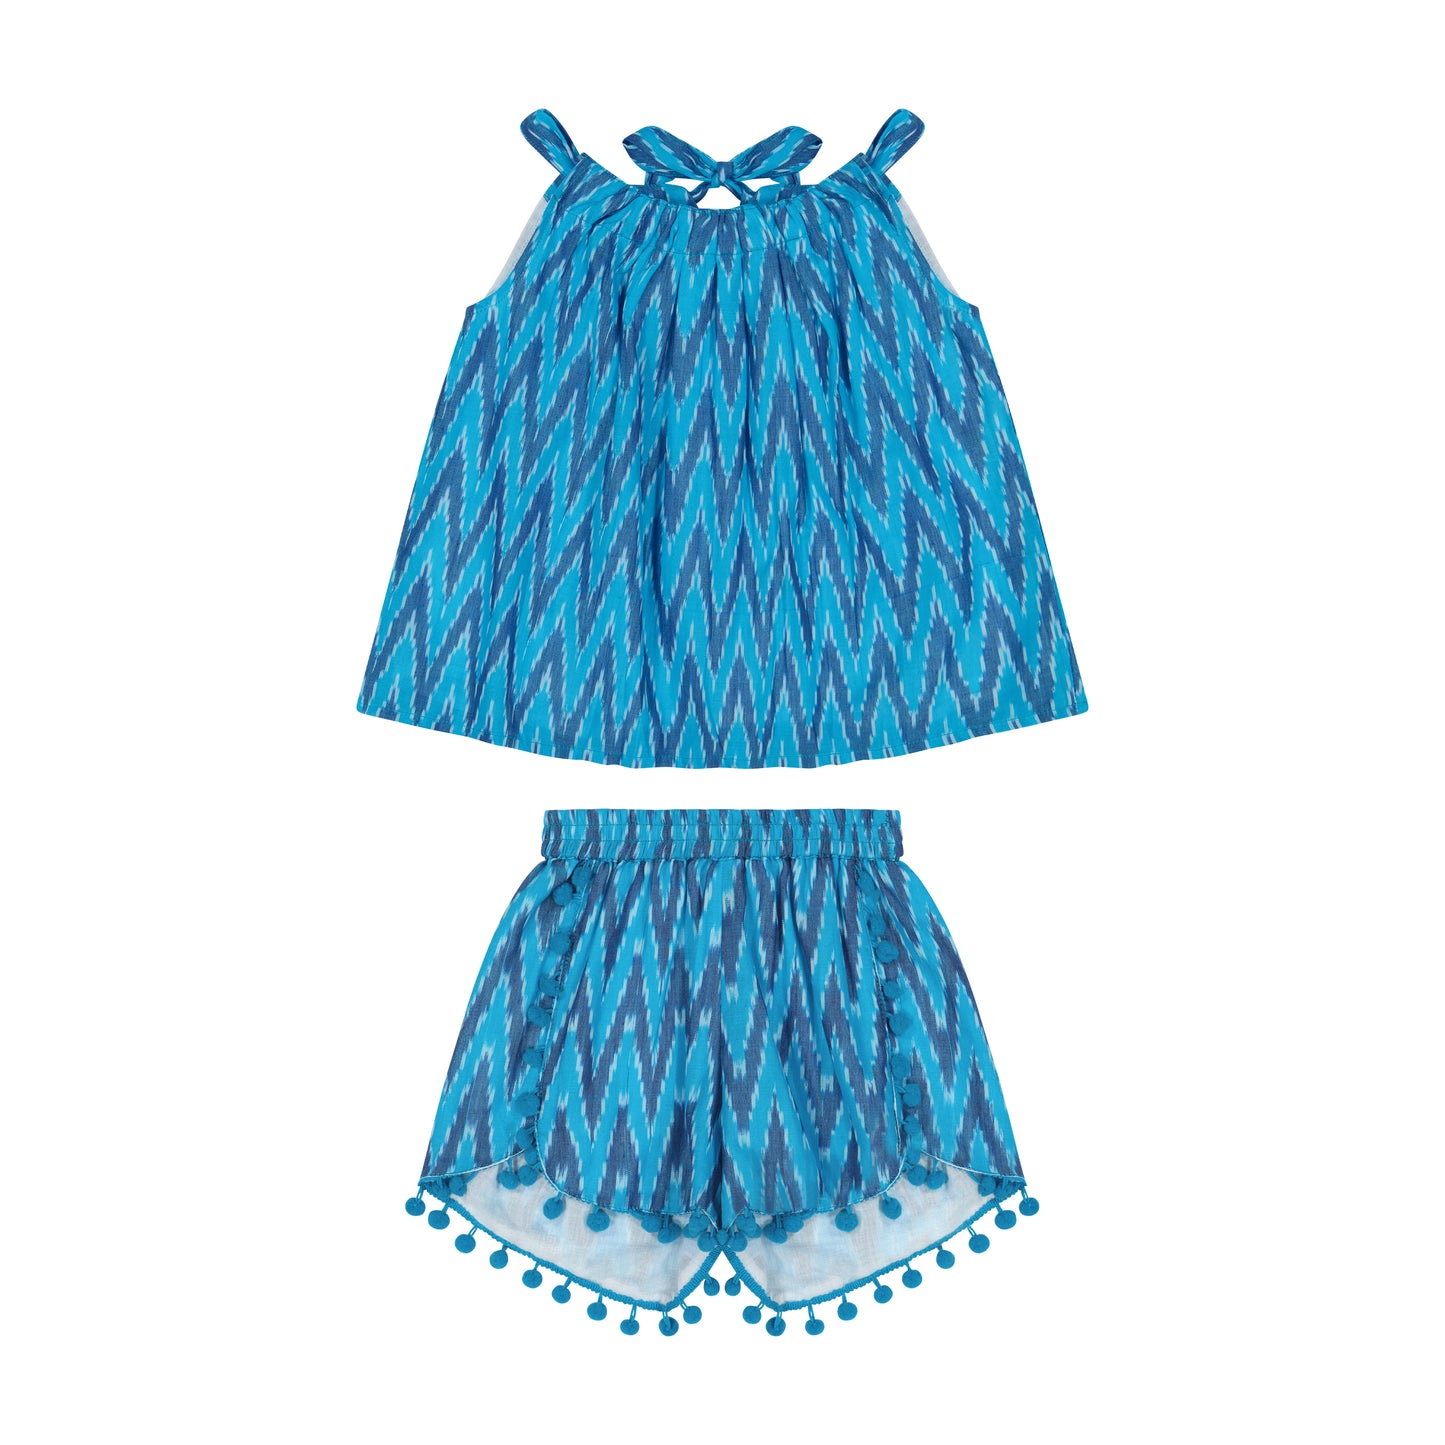 Colette Girl's Top And Short Set Turquoise Blue Ikat - final sale